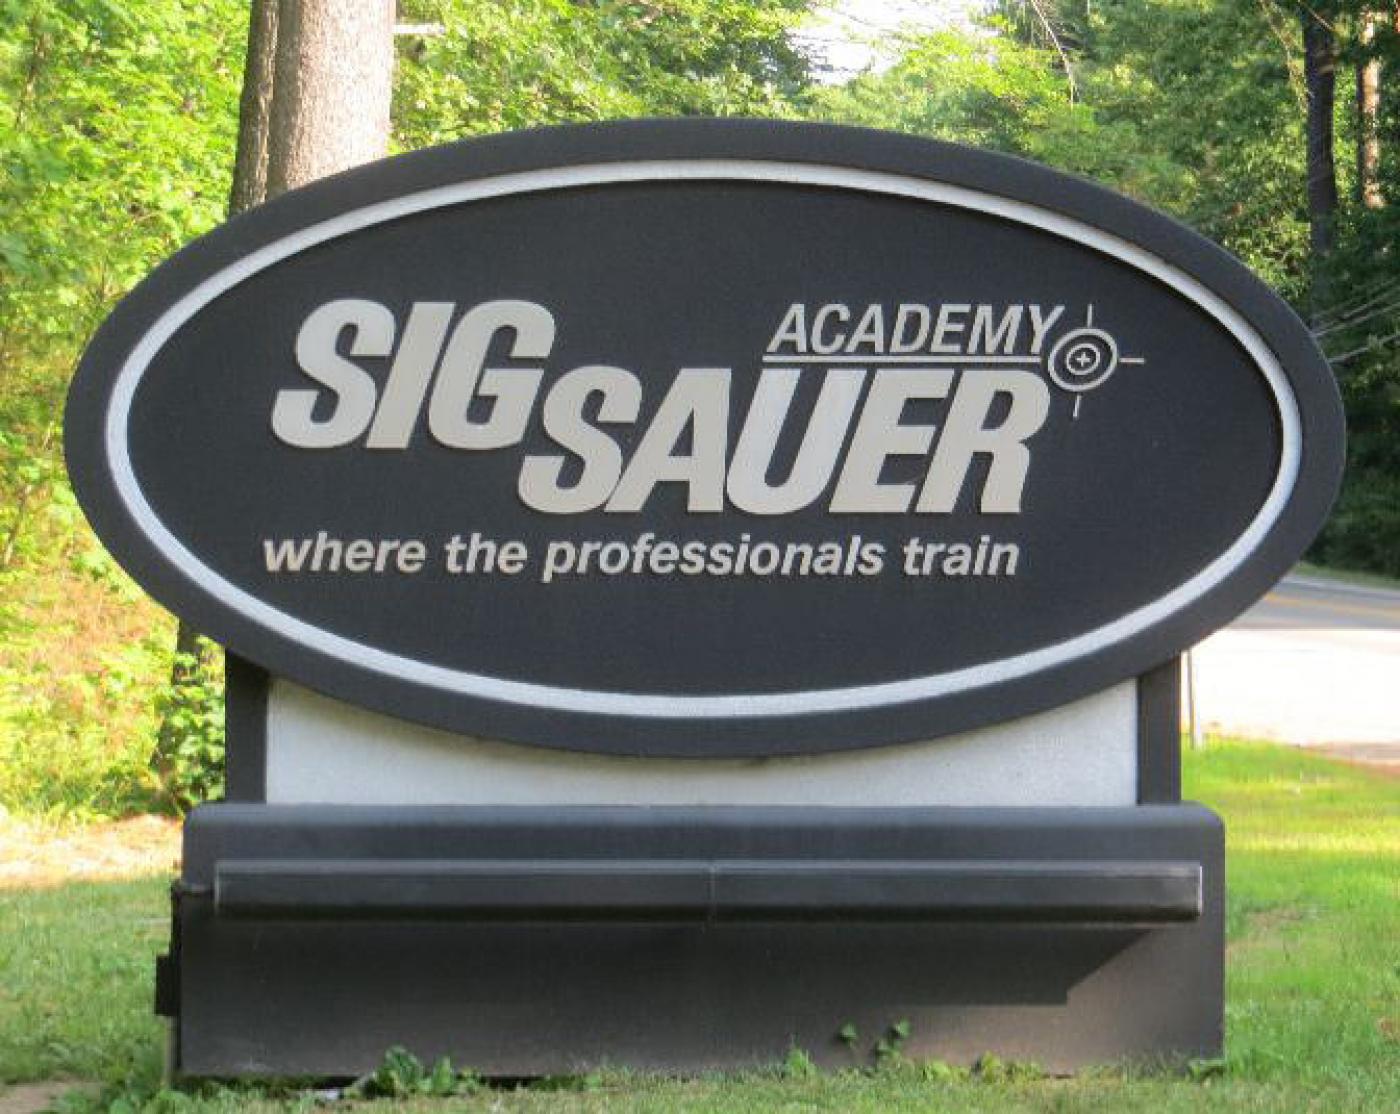 North Branch Begins Work on New Testing and Engineering Range at Sig Sauer Academy